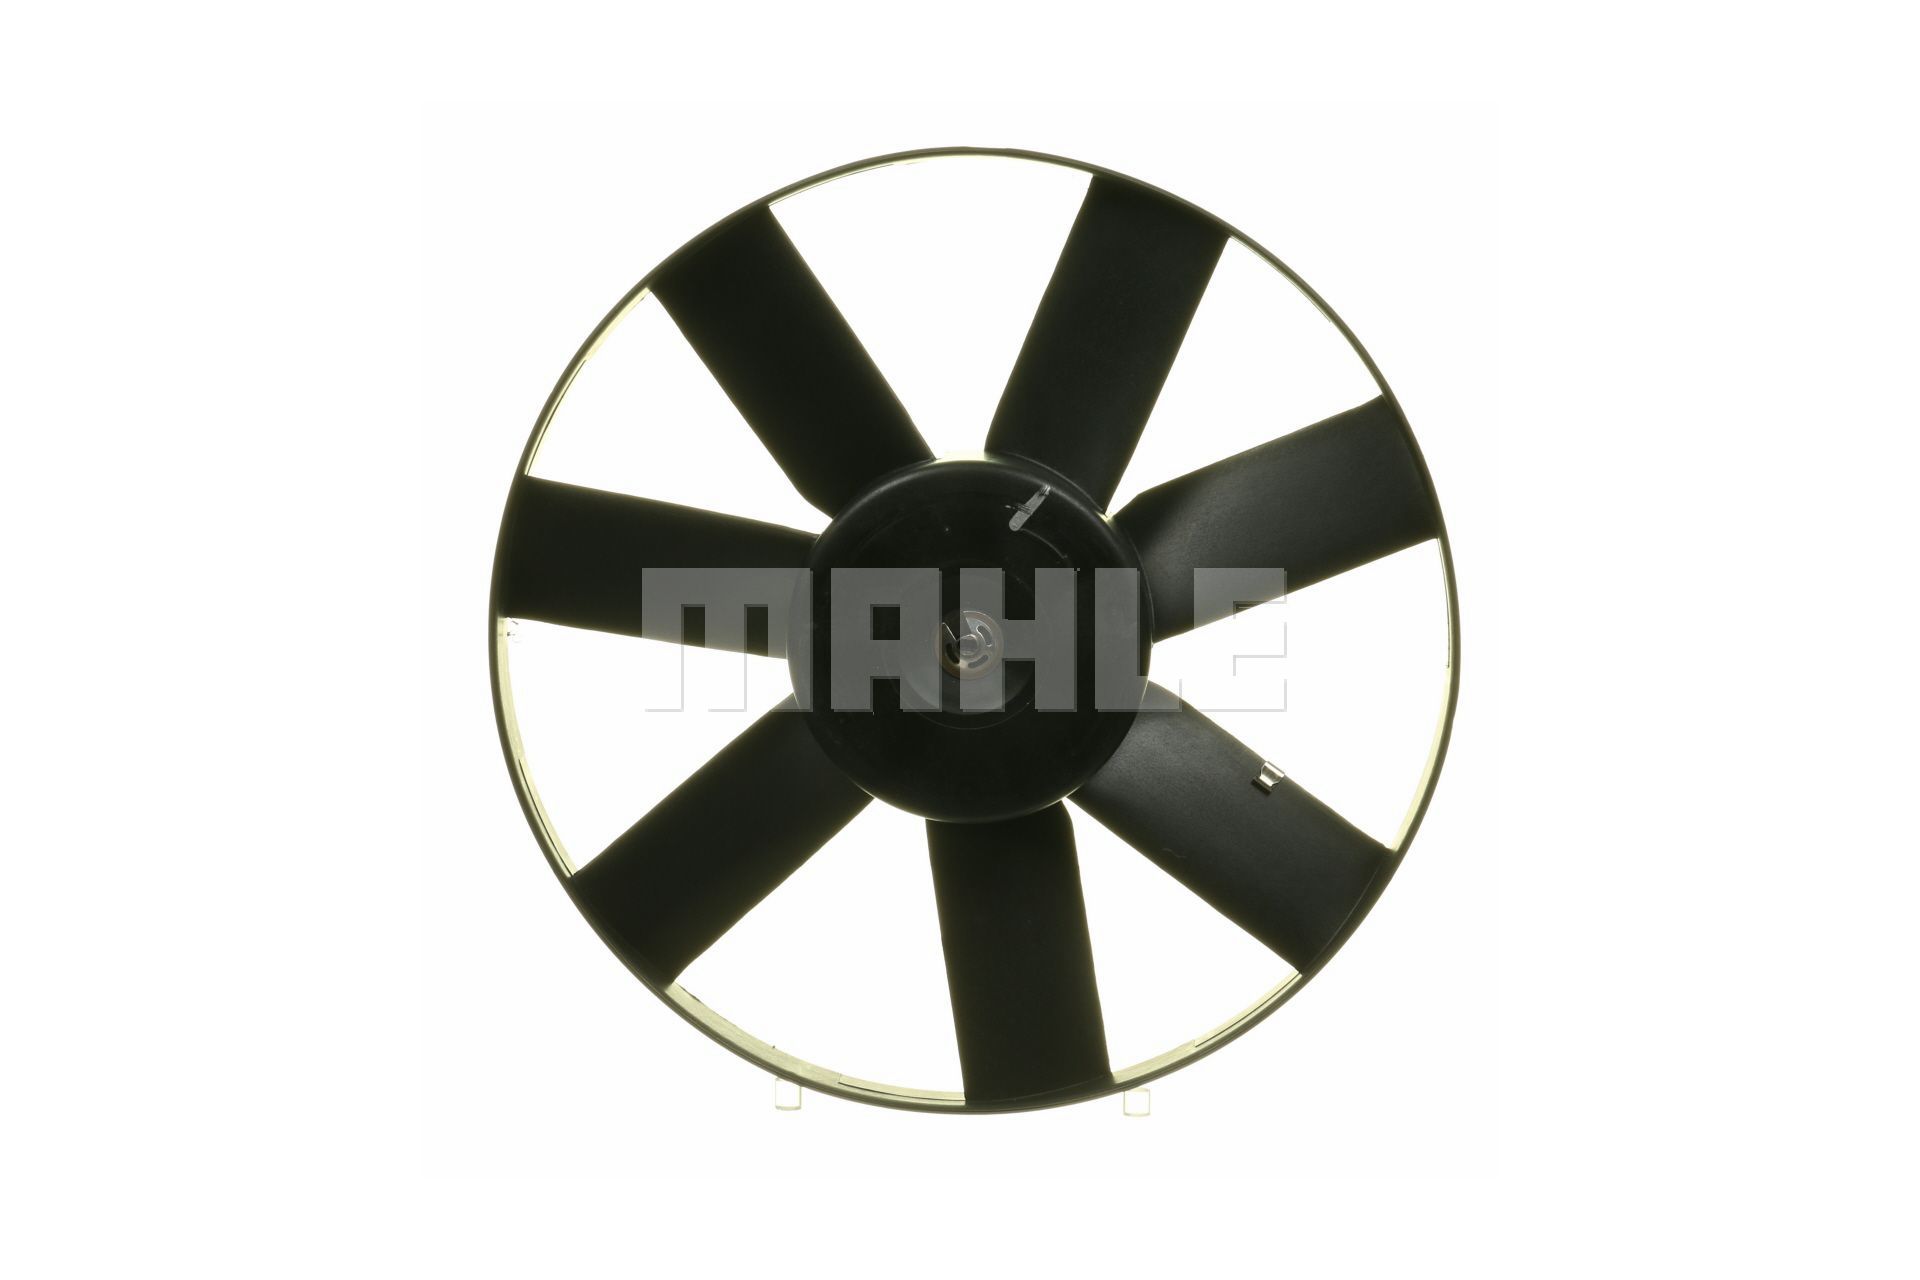 009144611 MAHLE ORIGINAL for vehicles with trailer hitch, for vehicles without trailer hitch, for vehicles without air conditioning, Ø: 345 mm, 12V, 250/60W, without radiator fan shroud Cooling Fan CFF 15 000P buy